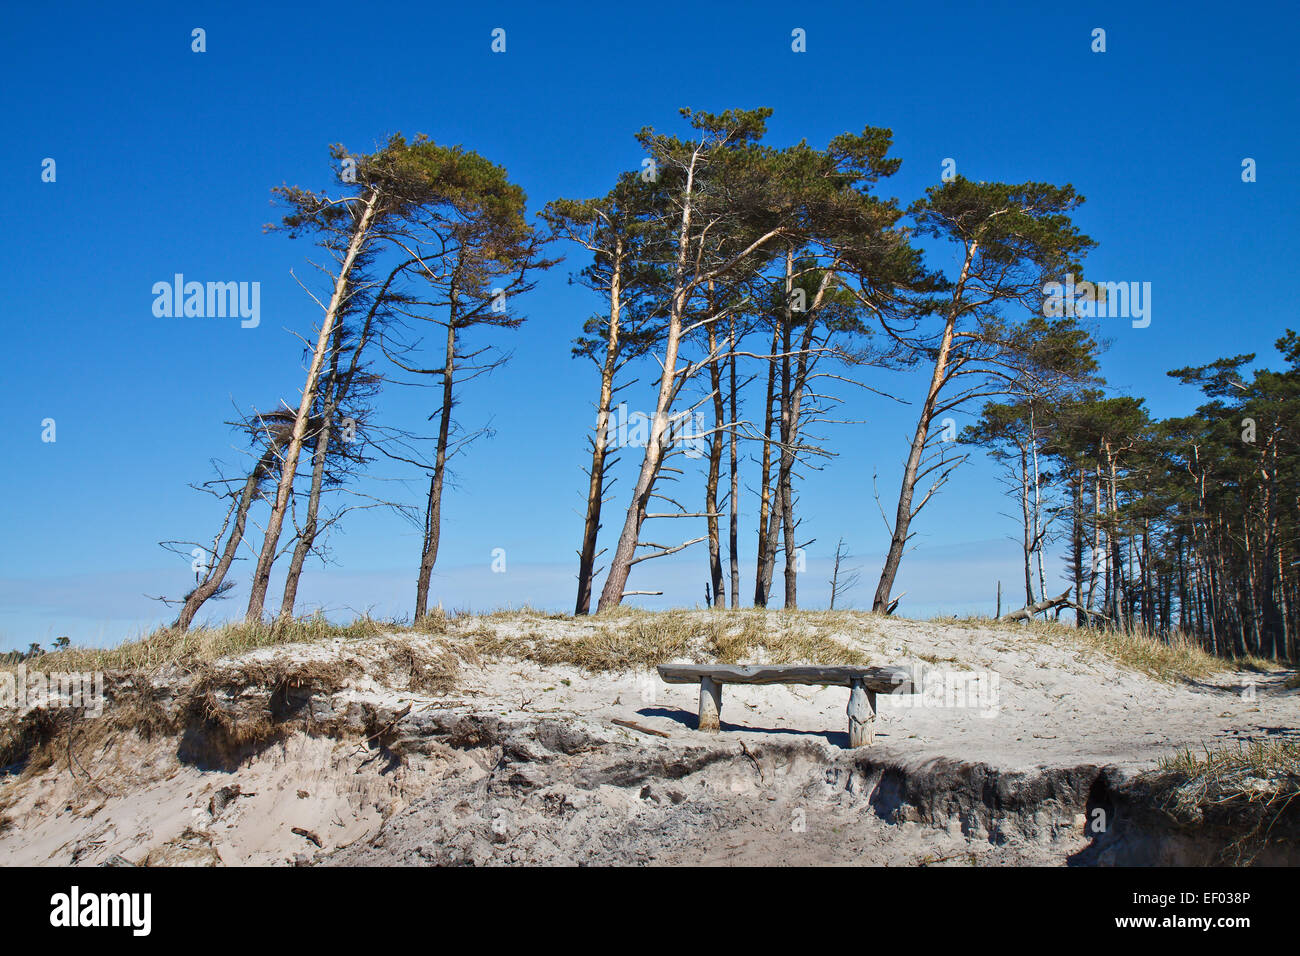 Group of trees on the western beach. Stock Photo